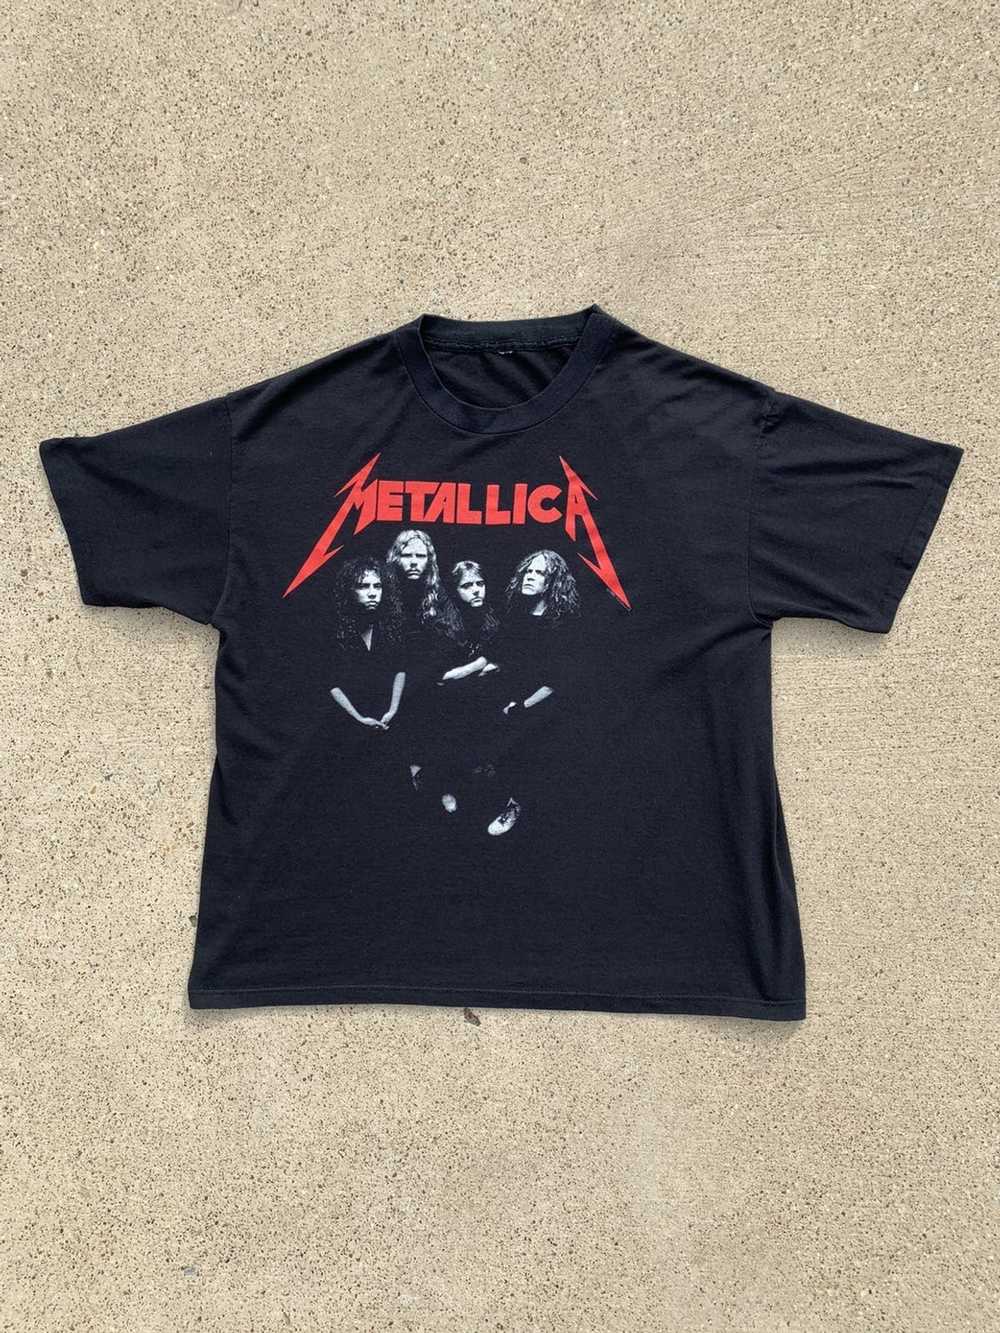 Metallica - And Justice For All - 1994 Giant T Shirt … - Gem